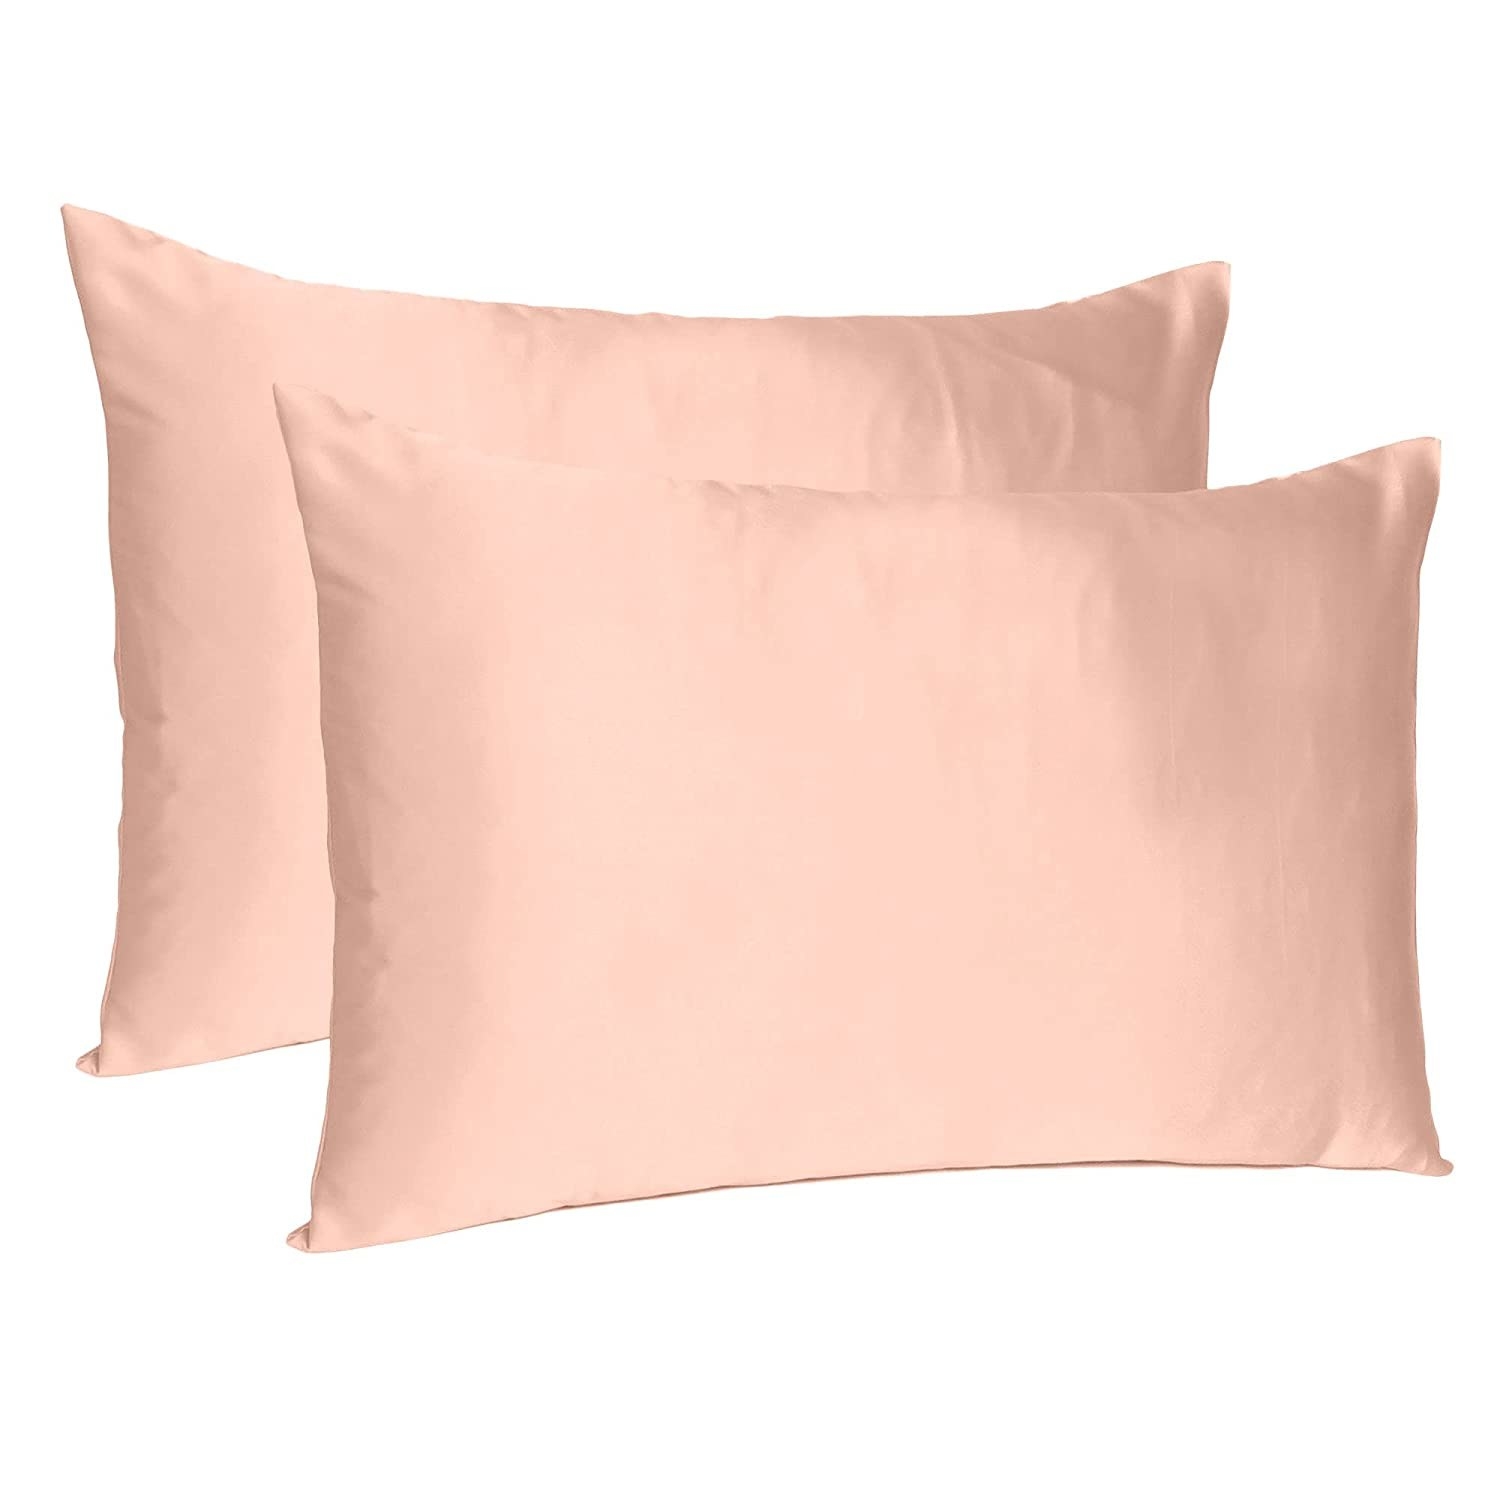 Two pastel terracotta pillow covers